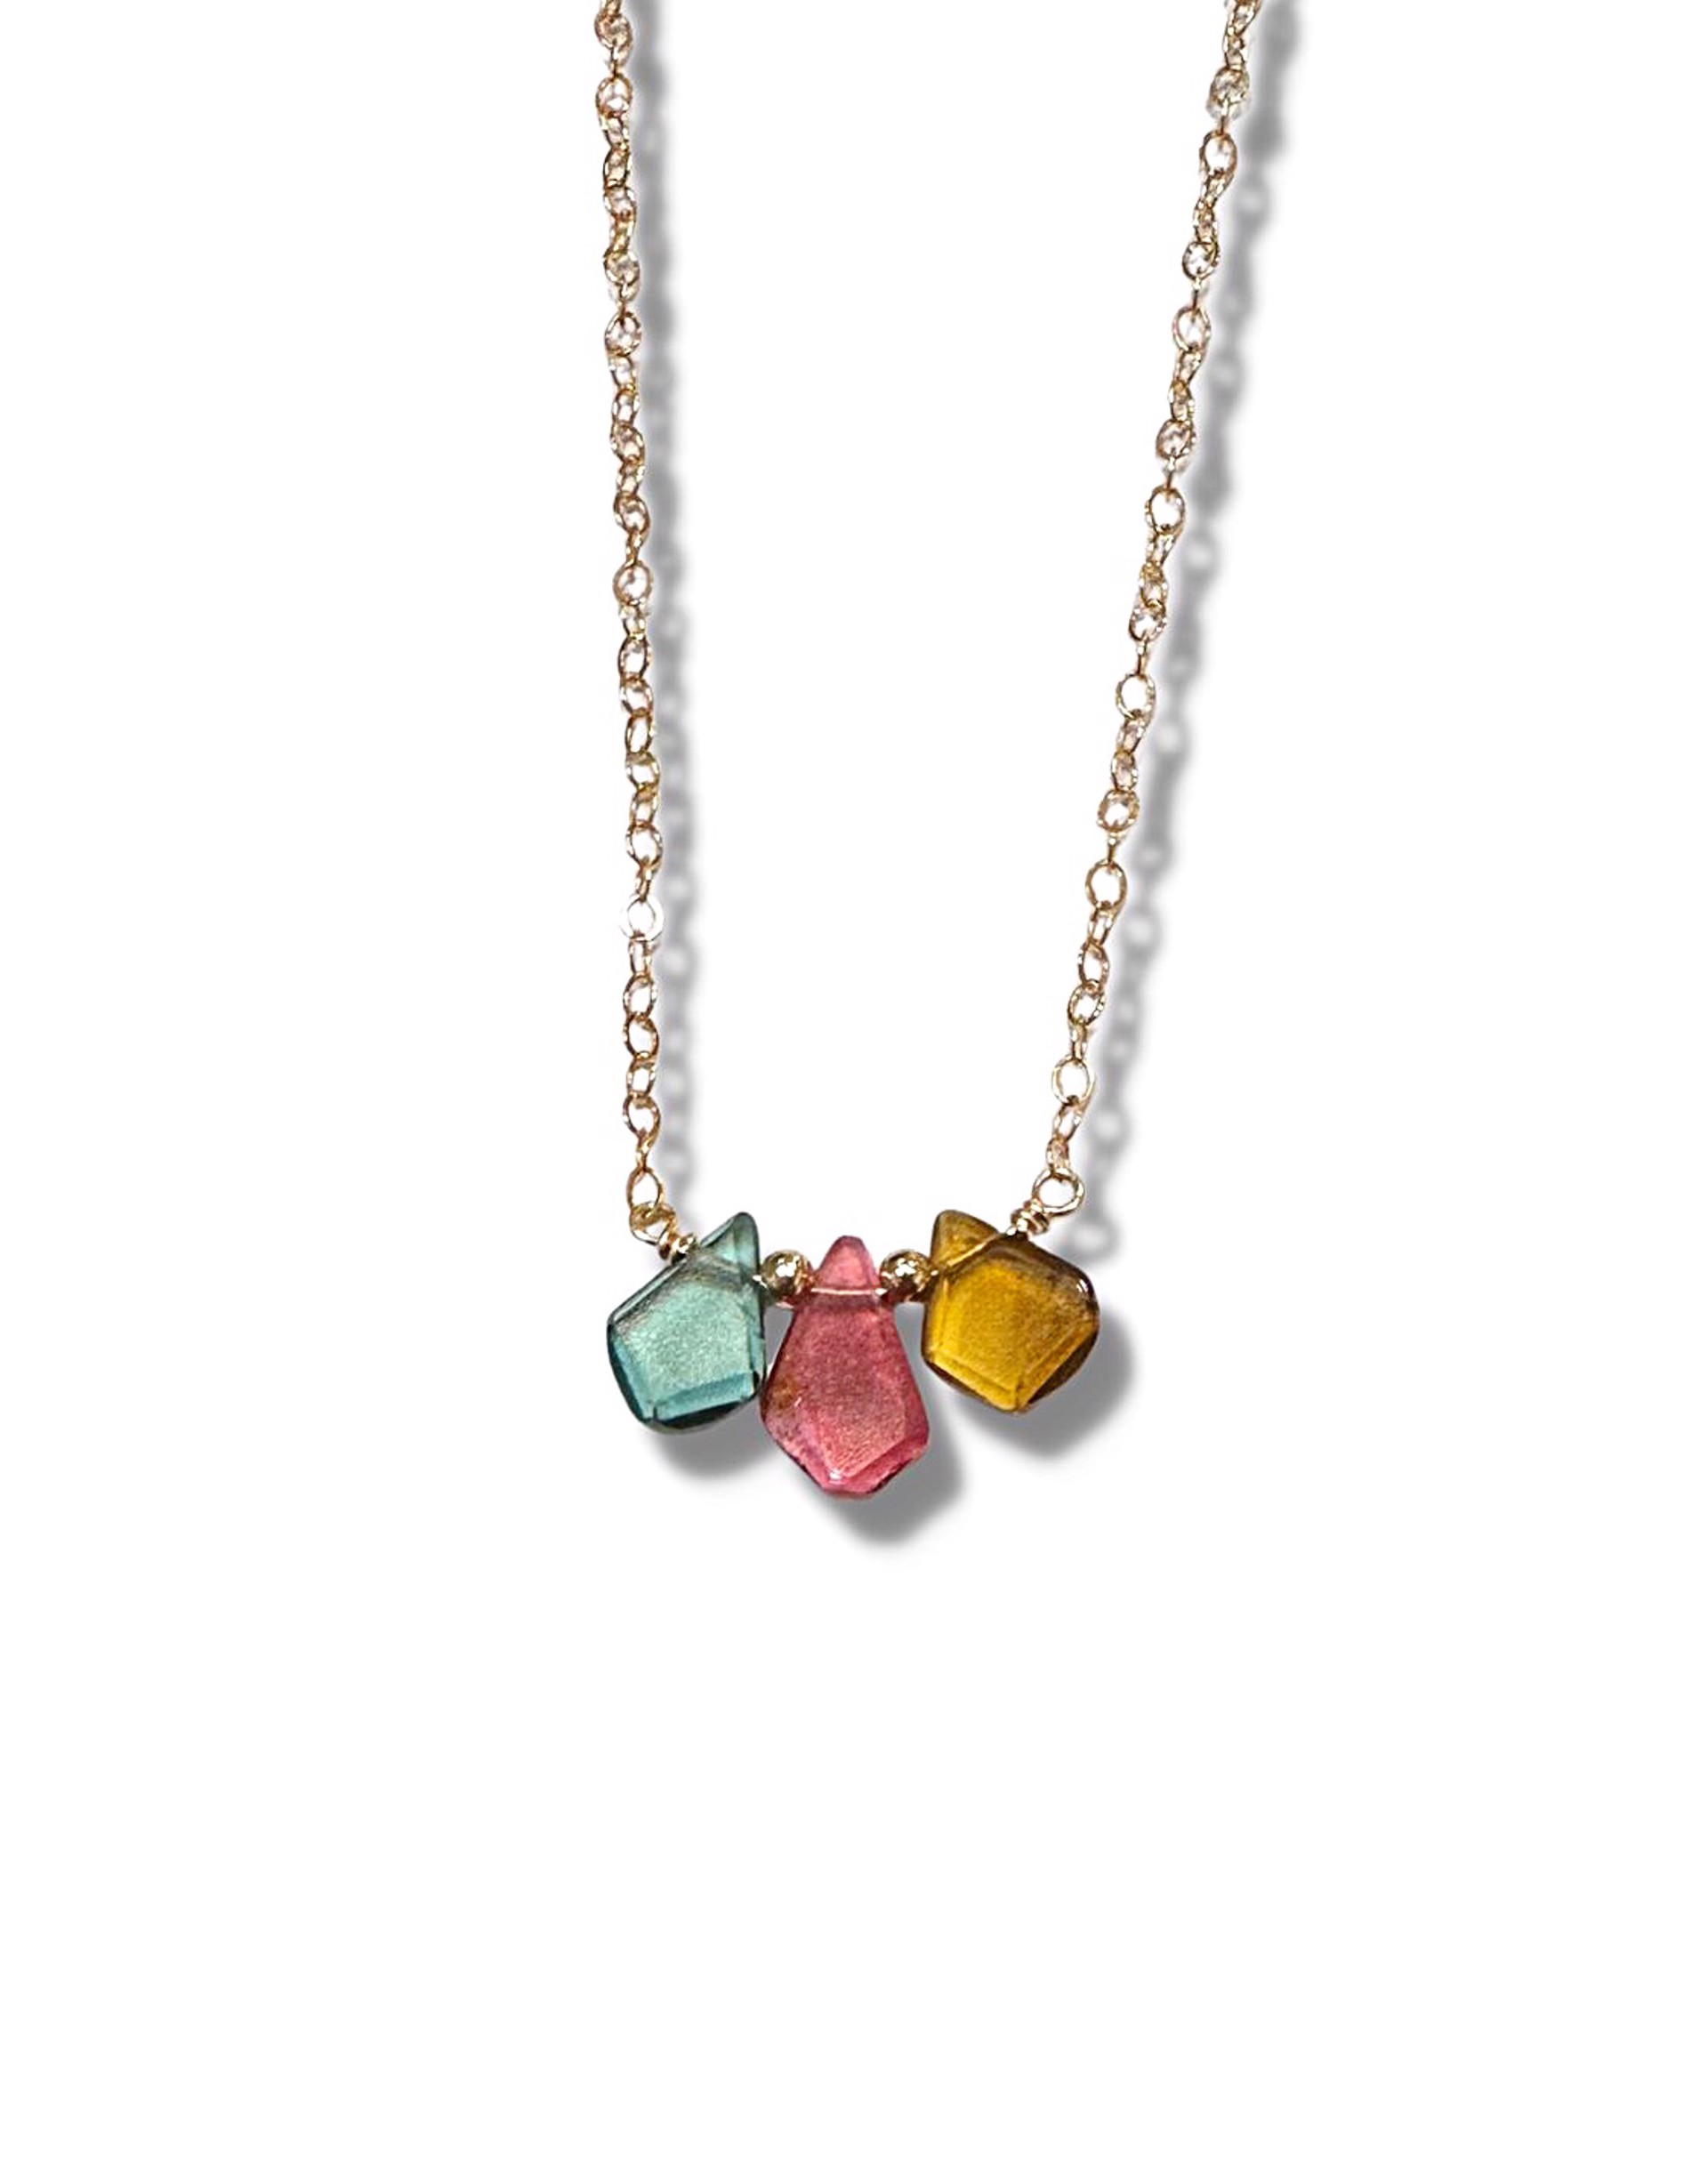 Necklace - Tourmaline with 14K Gold Filling by Julia Balestracci